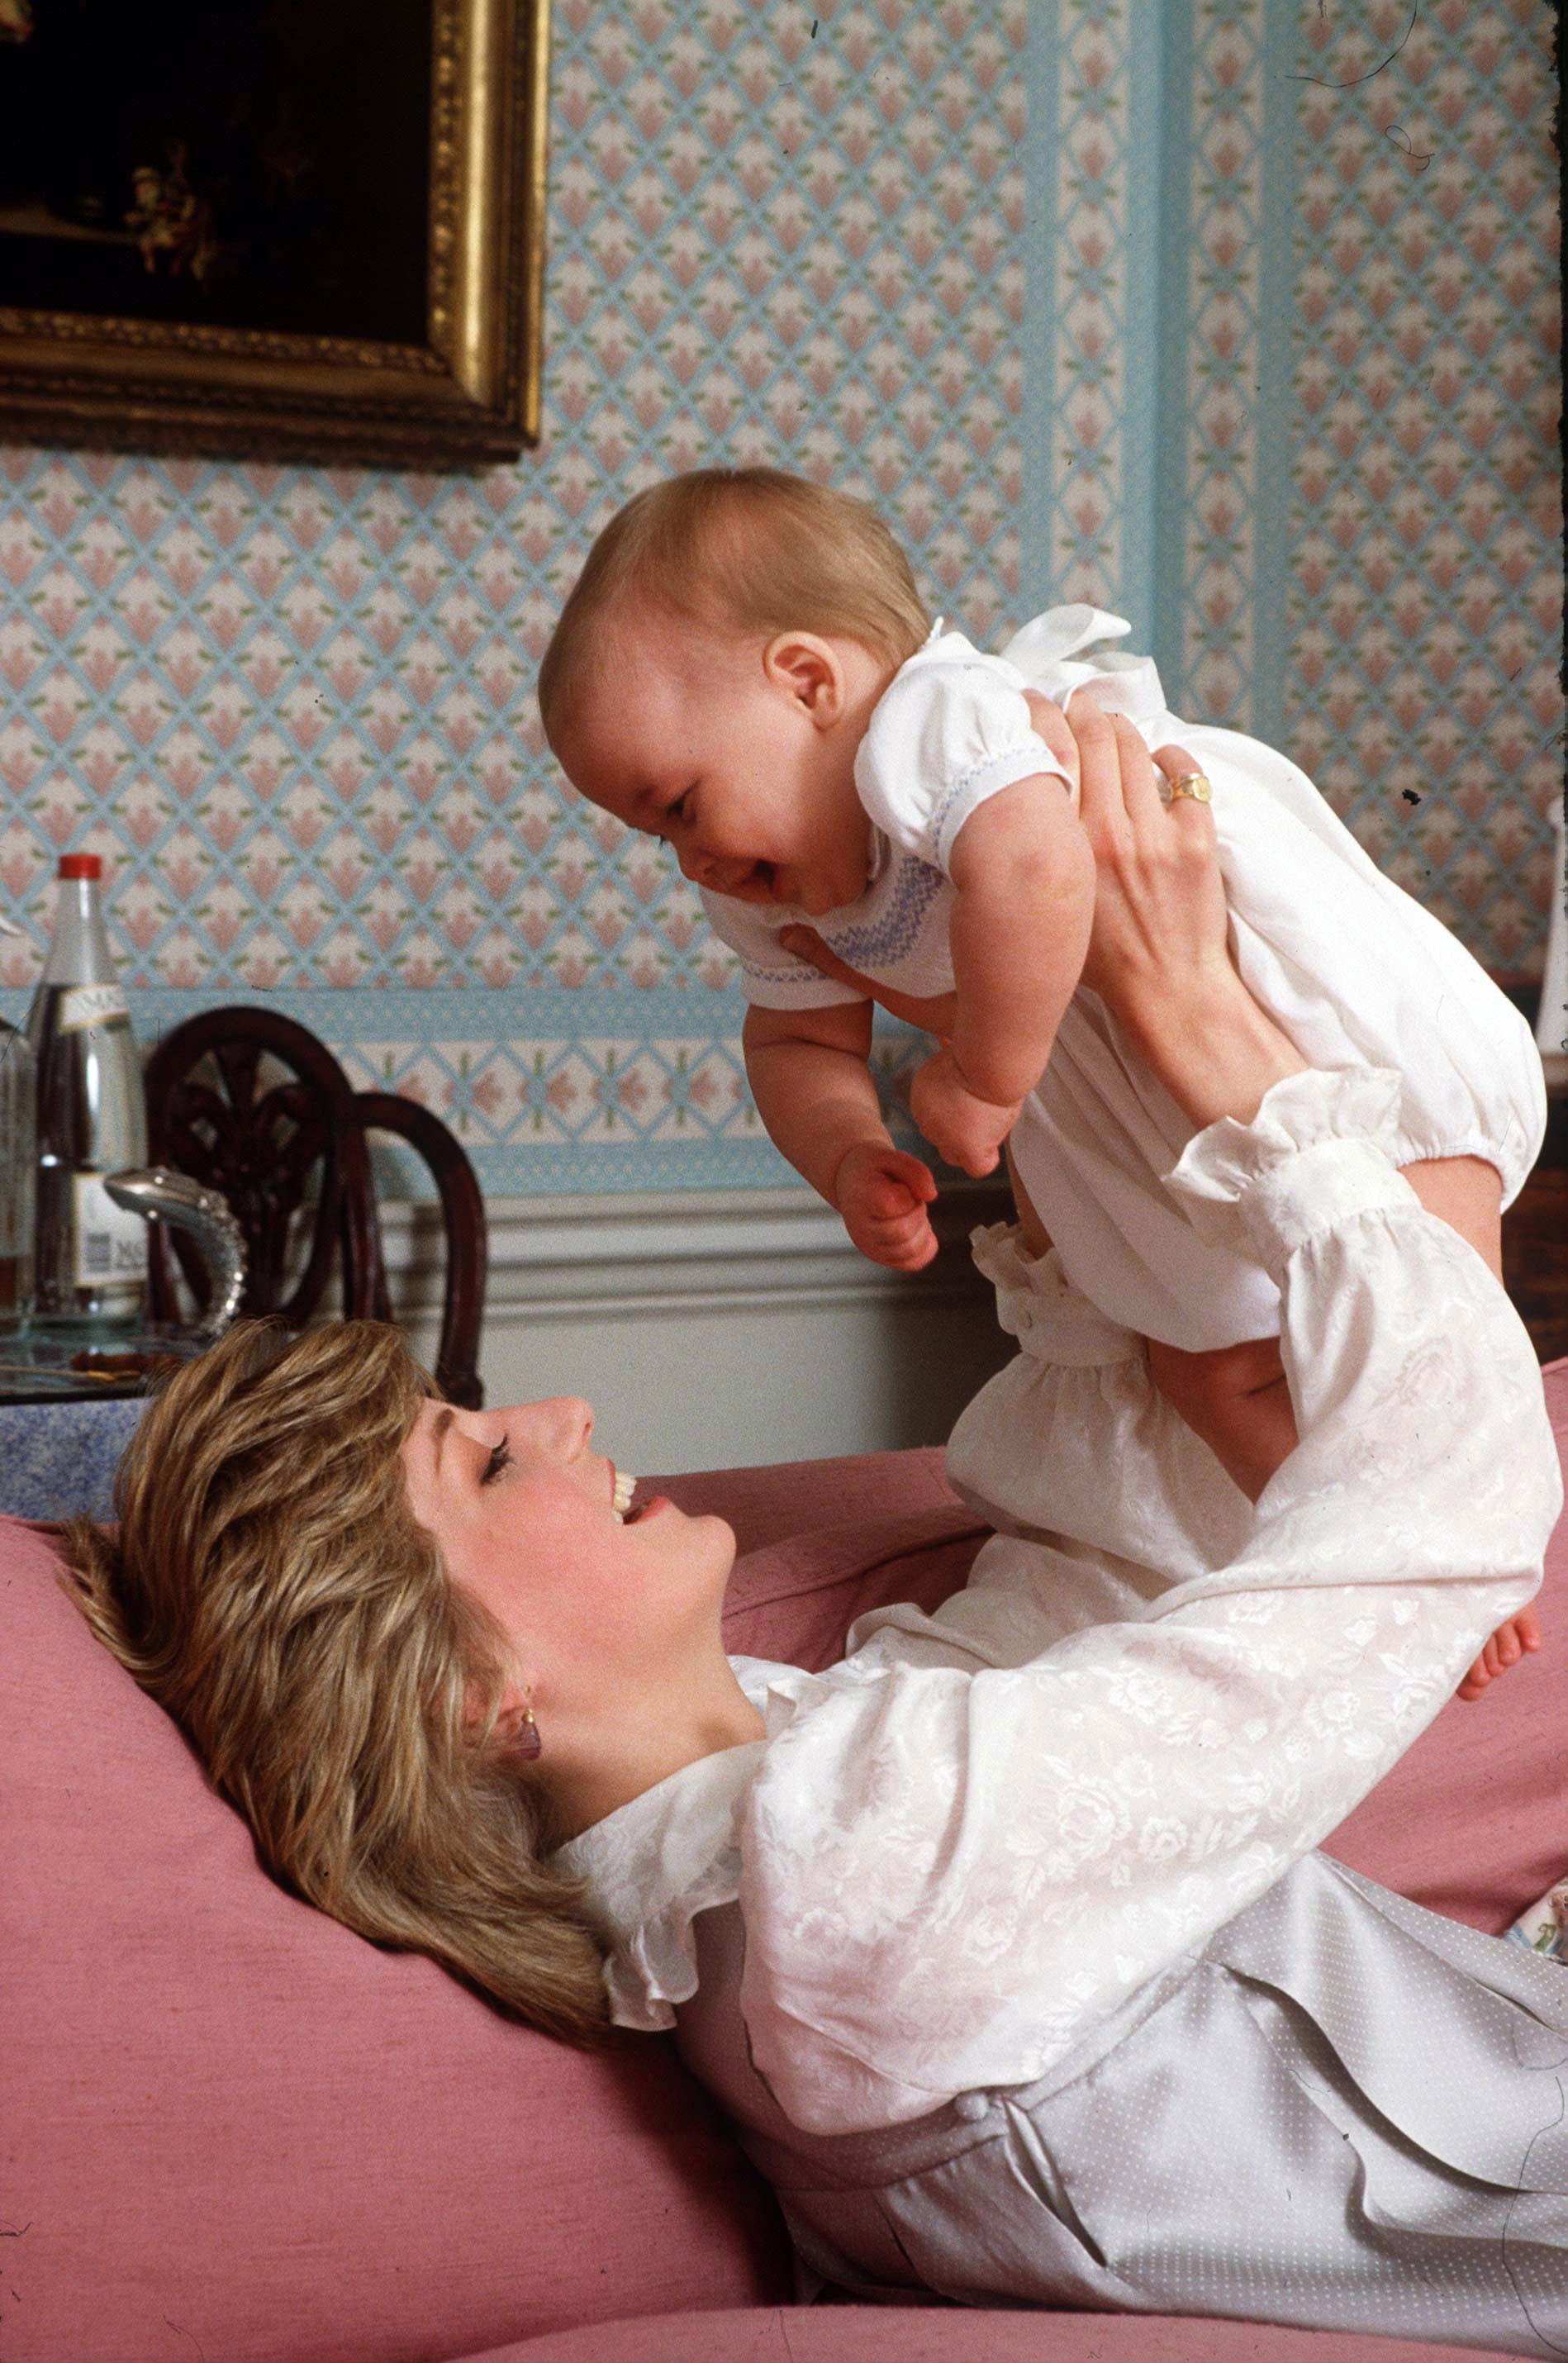 Princess Diana with Prince William at Kensington Palace in London, circa 1983. | Source: Getty Images